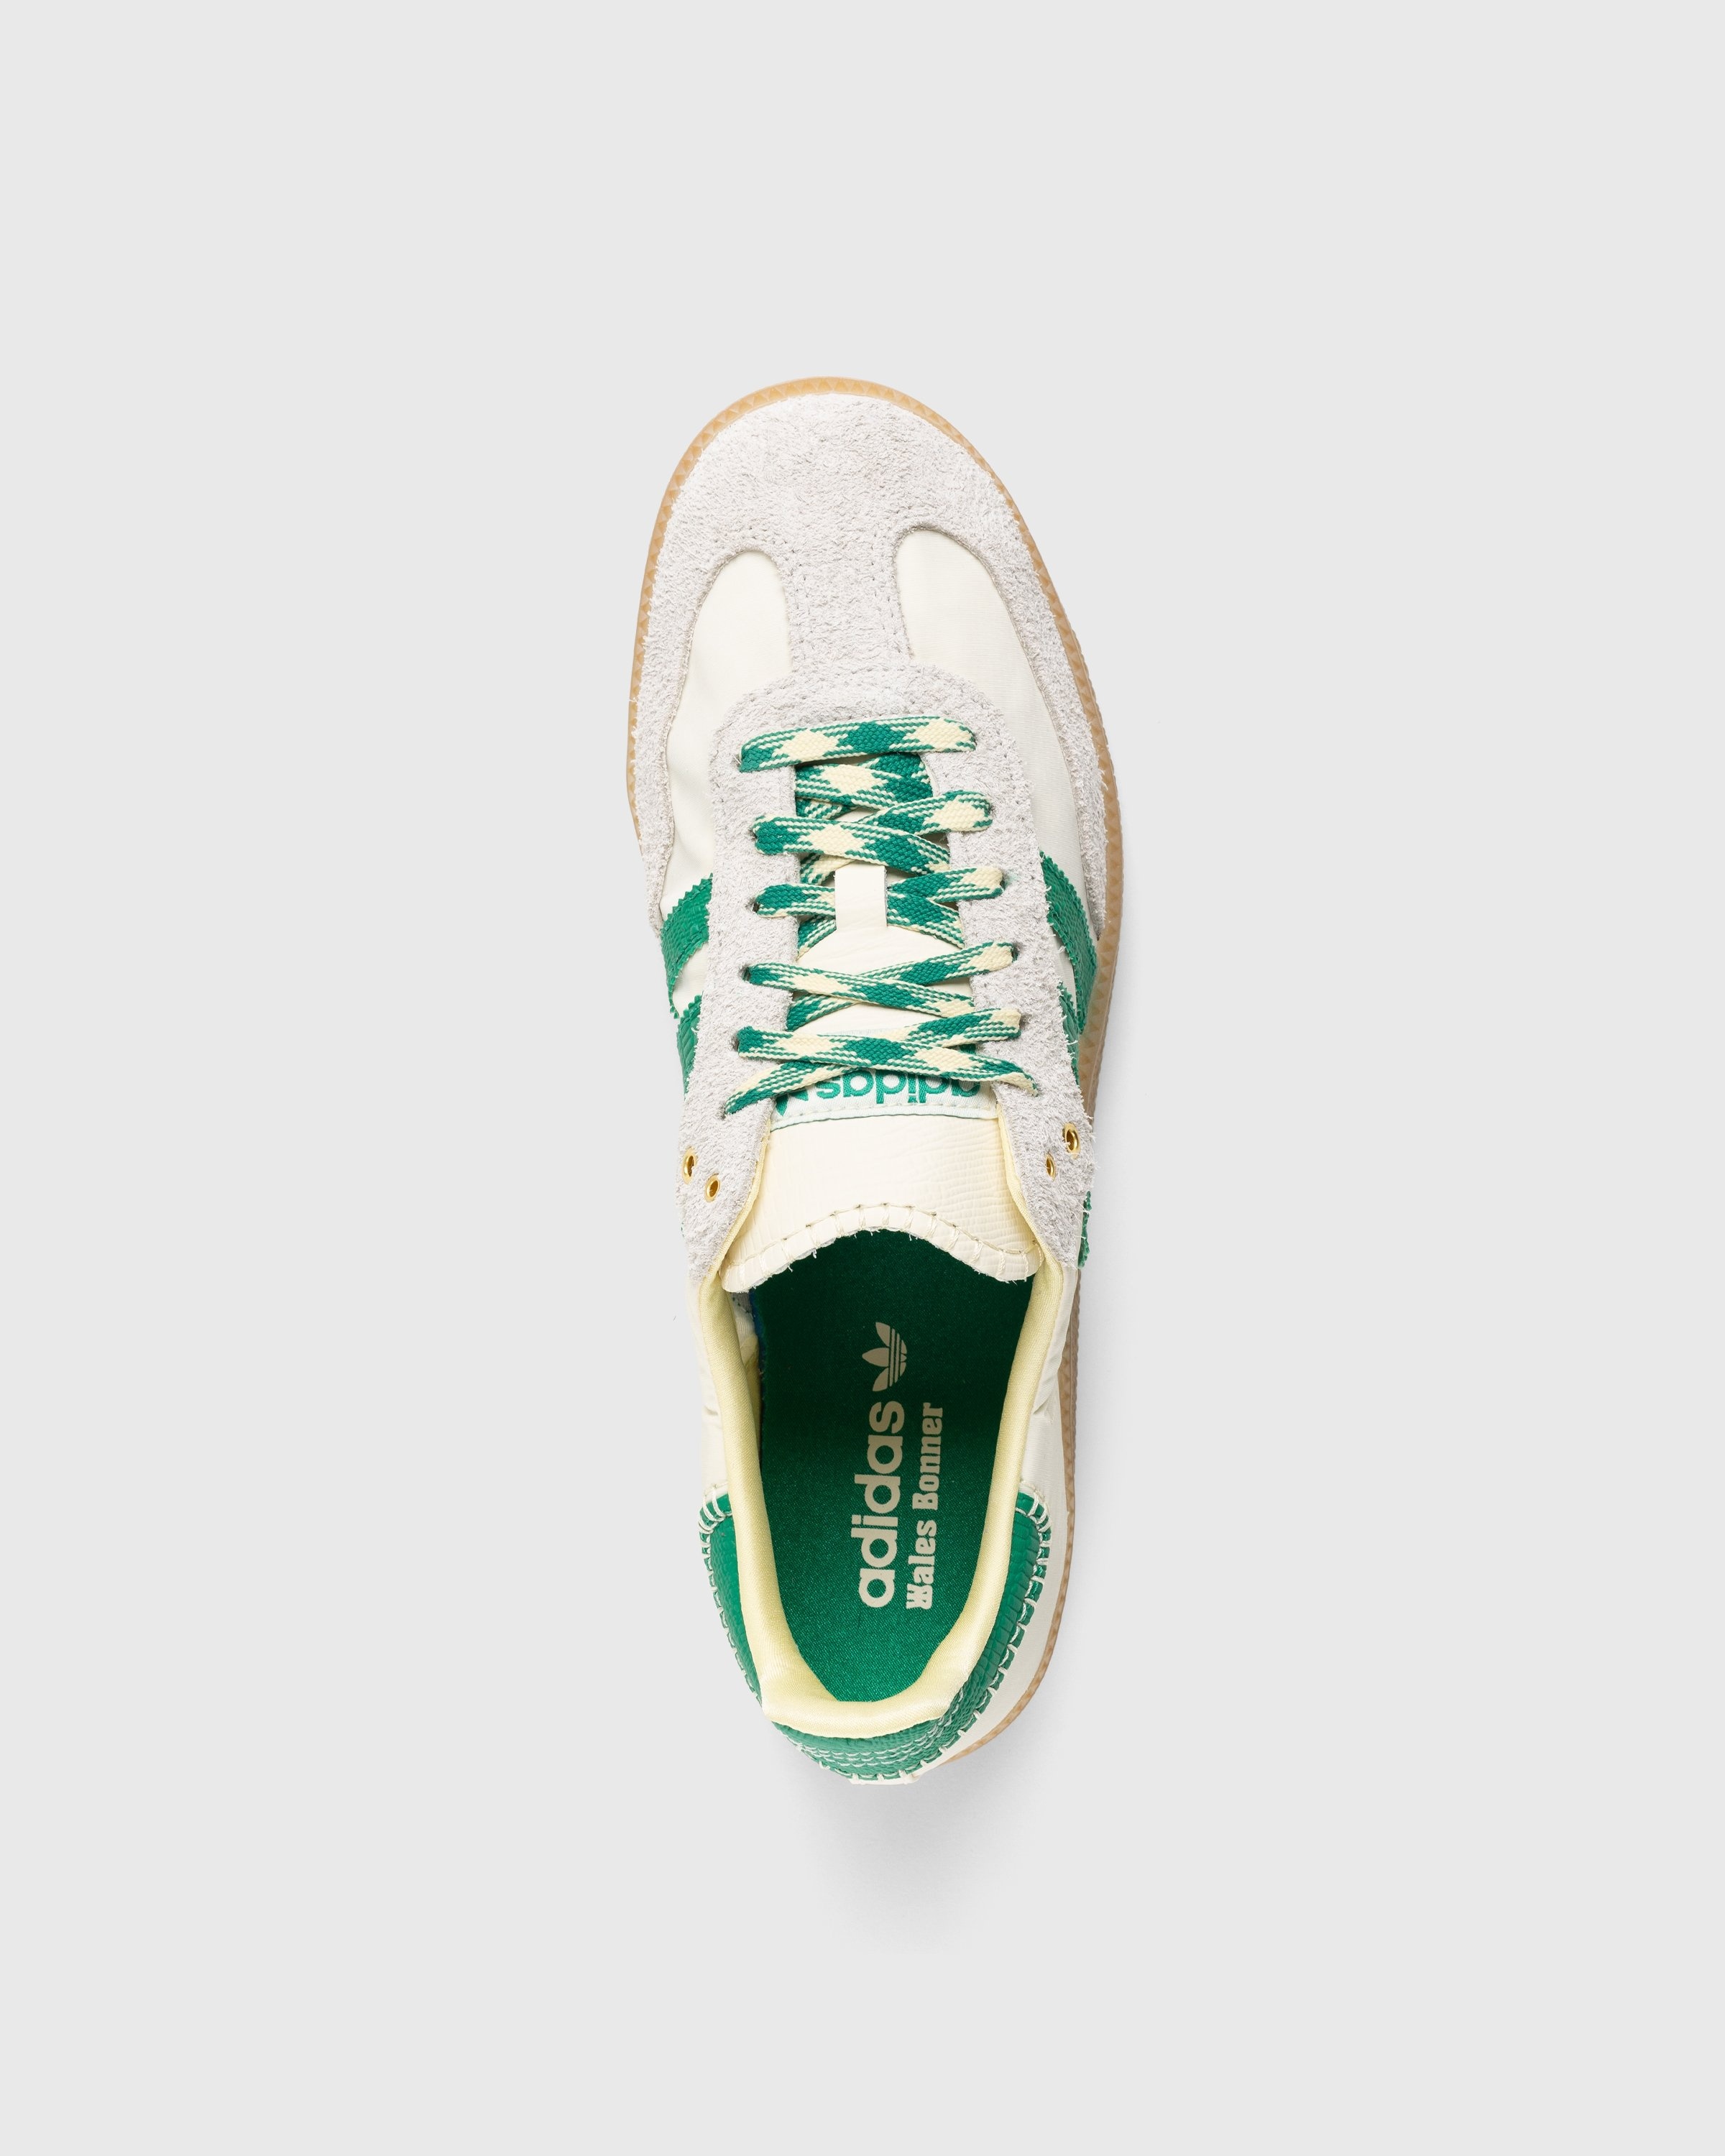 Adidas x Wales Bonner – WB Samba Cream White/Bold Green/Easy Yellow - Low Top Sneakers - Beige - Image 5